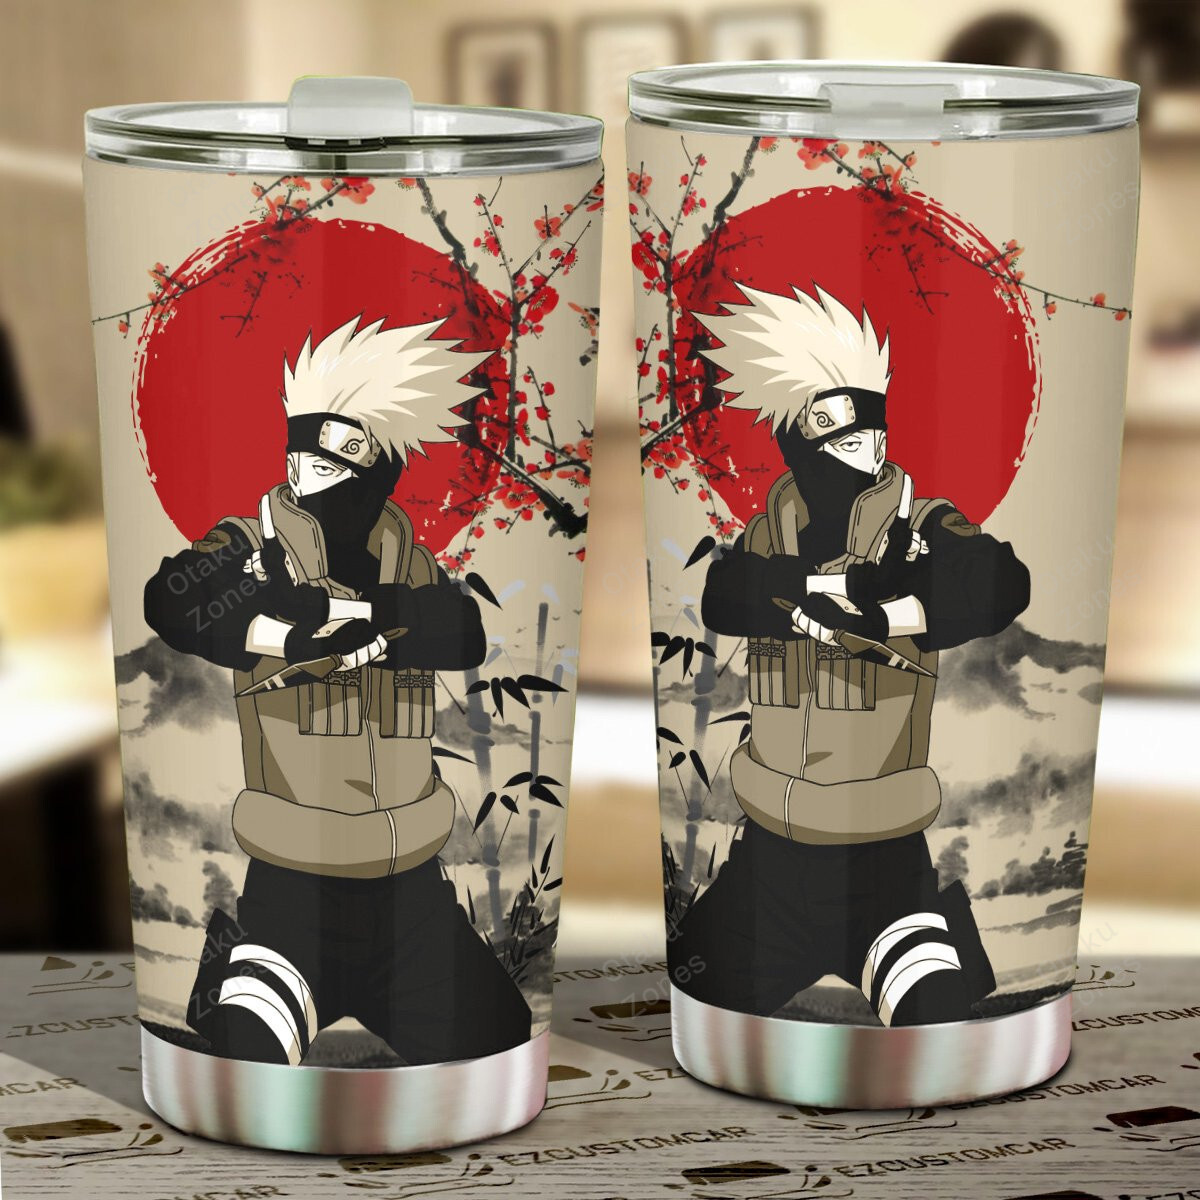 Go ahead and order your new tumbler now! 31